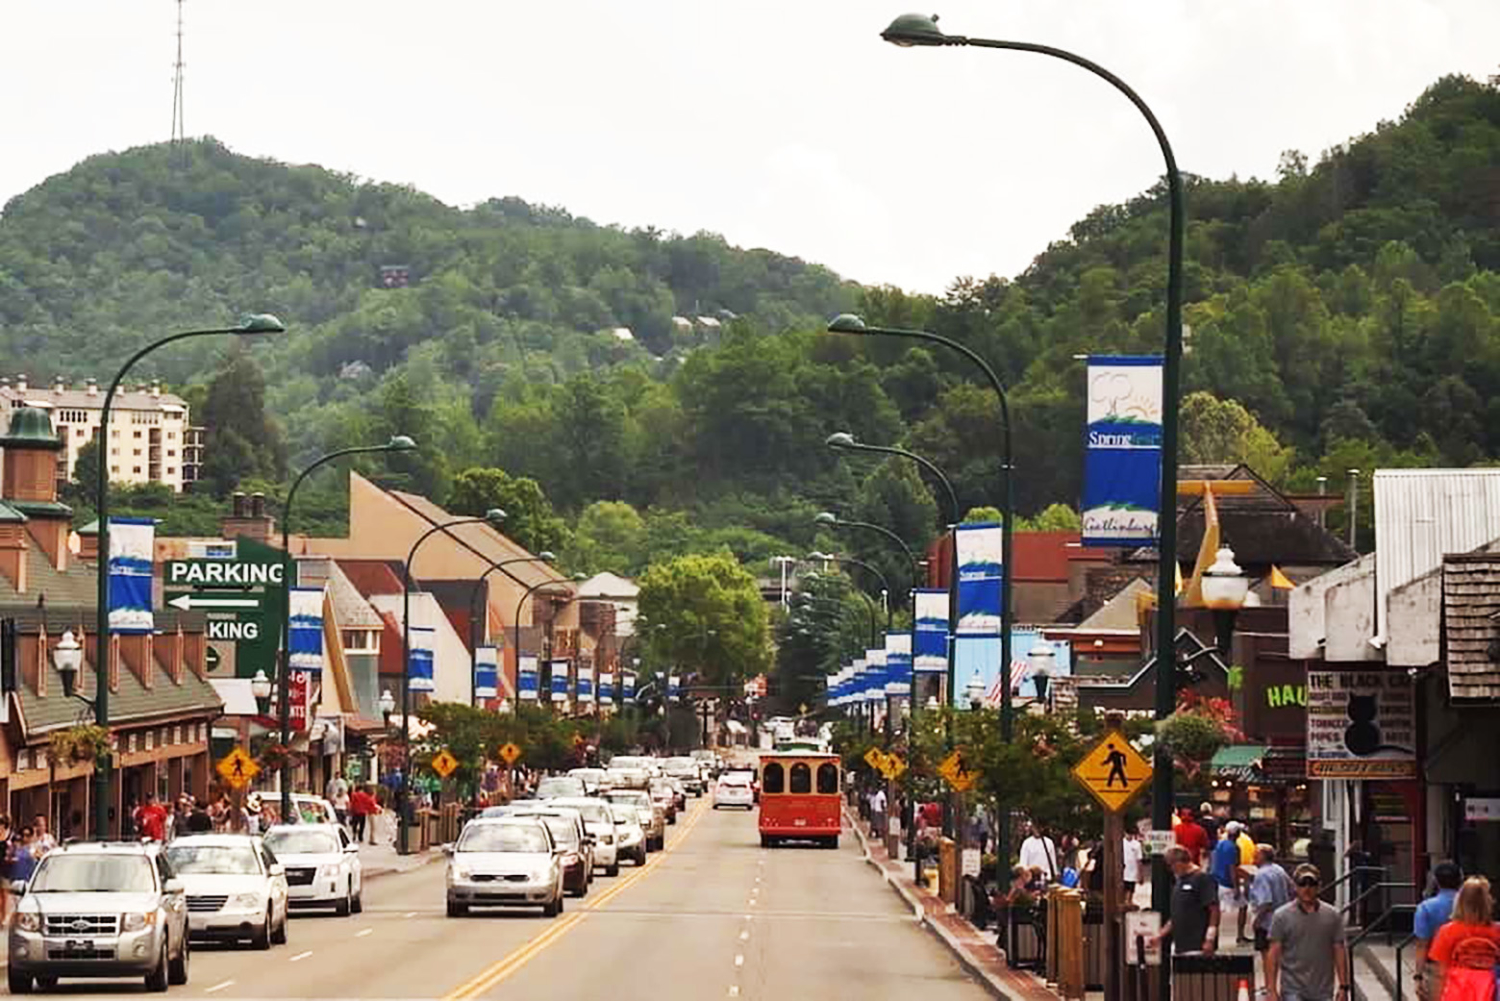 Visitors line the streets of Downtown Gatlinburg.